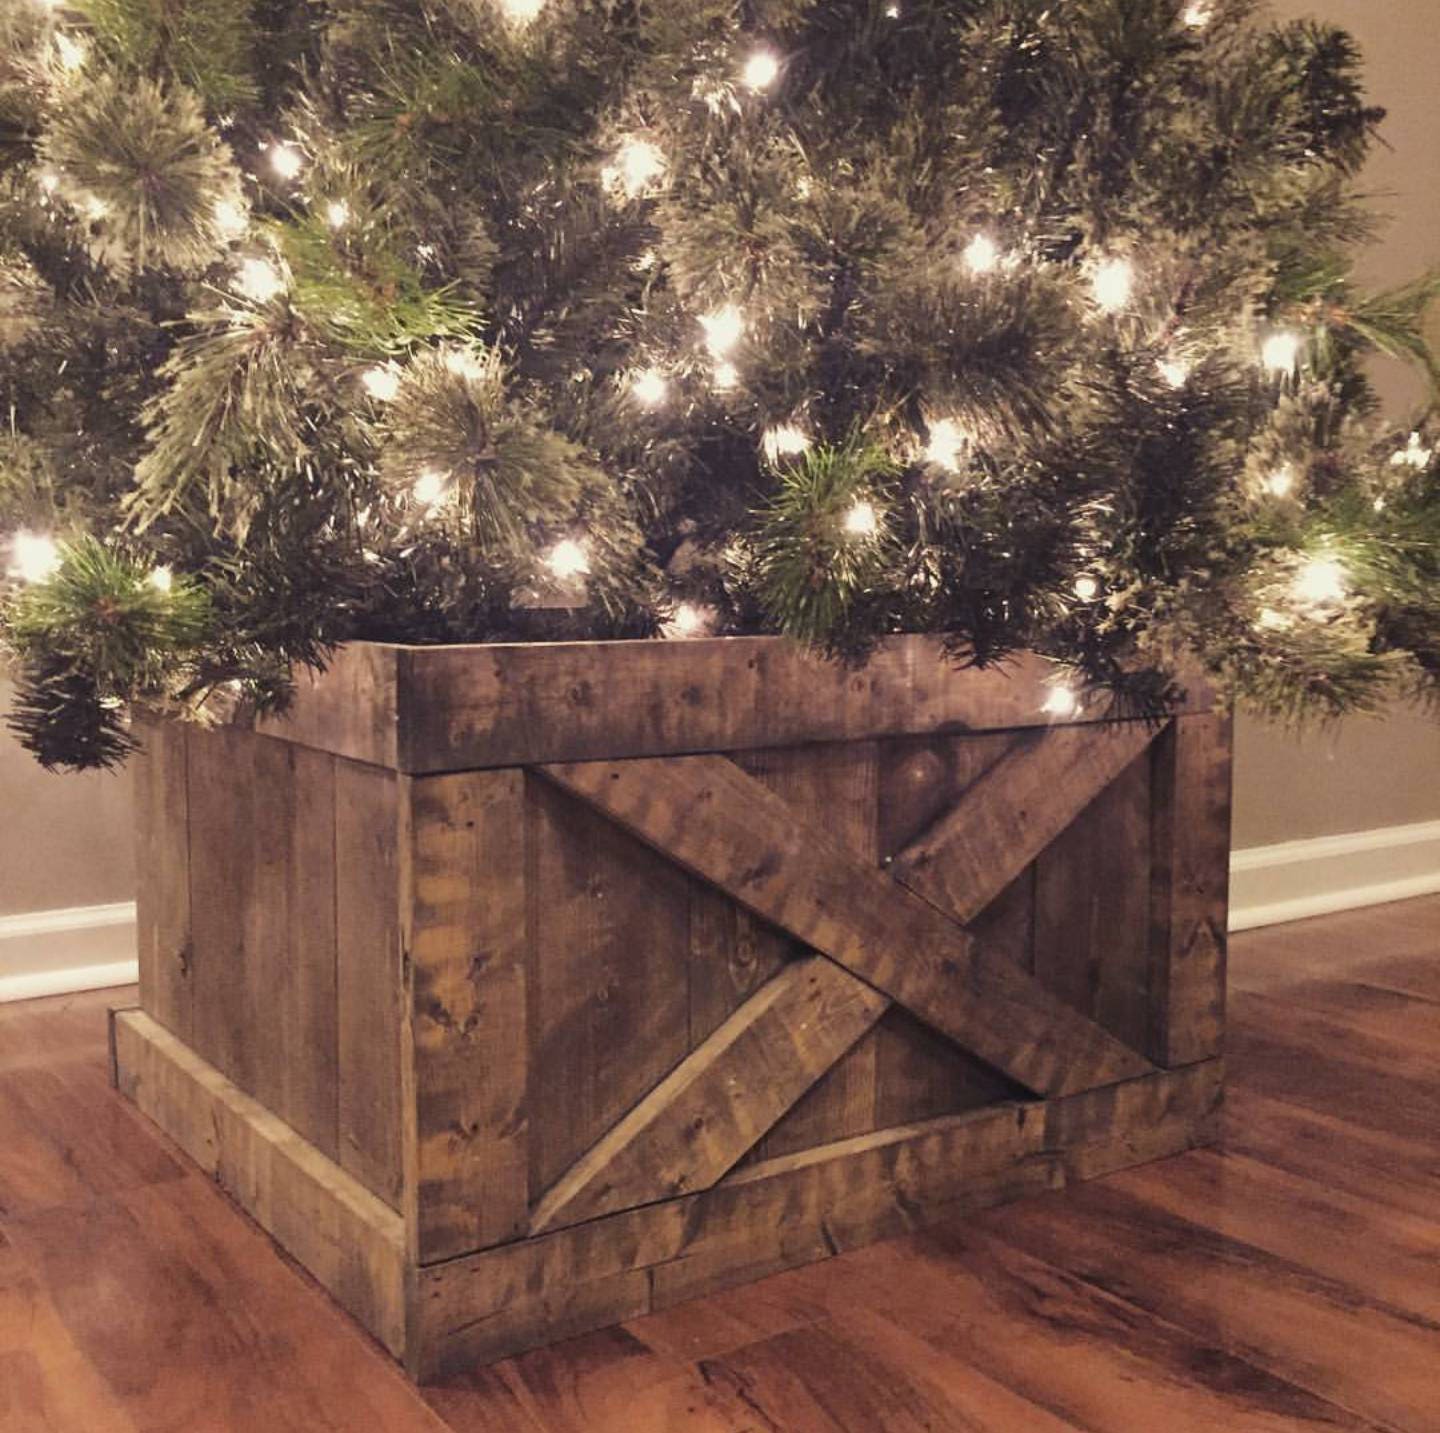 Diy wooden box for christmas tree